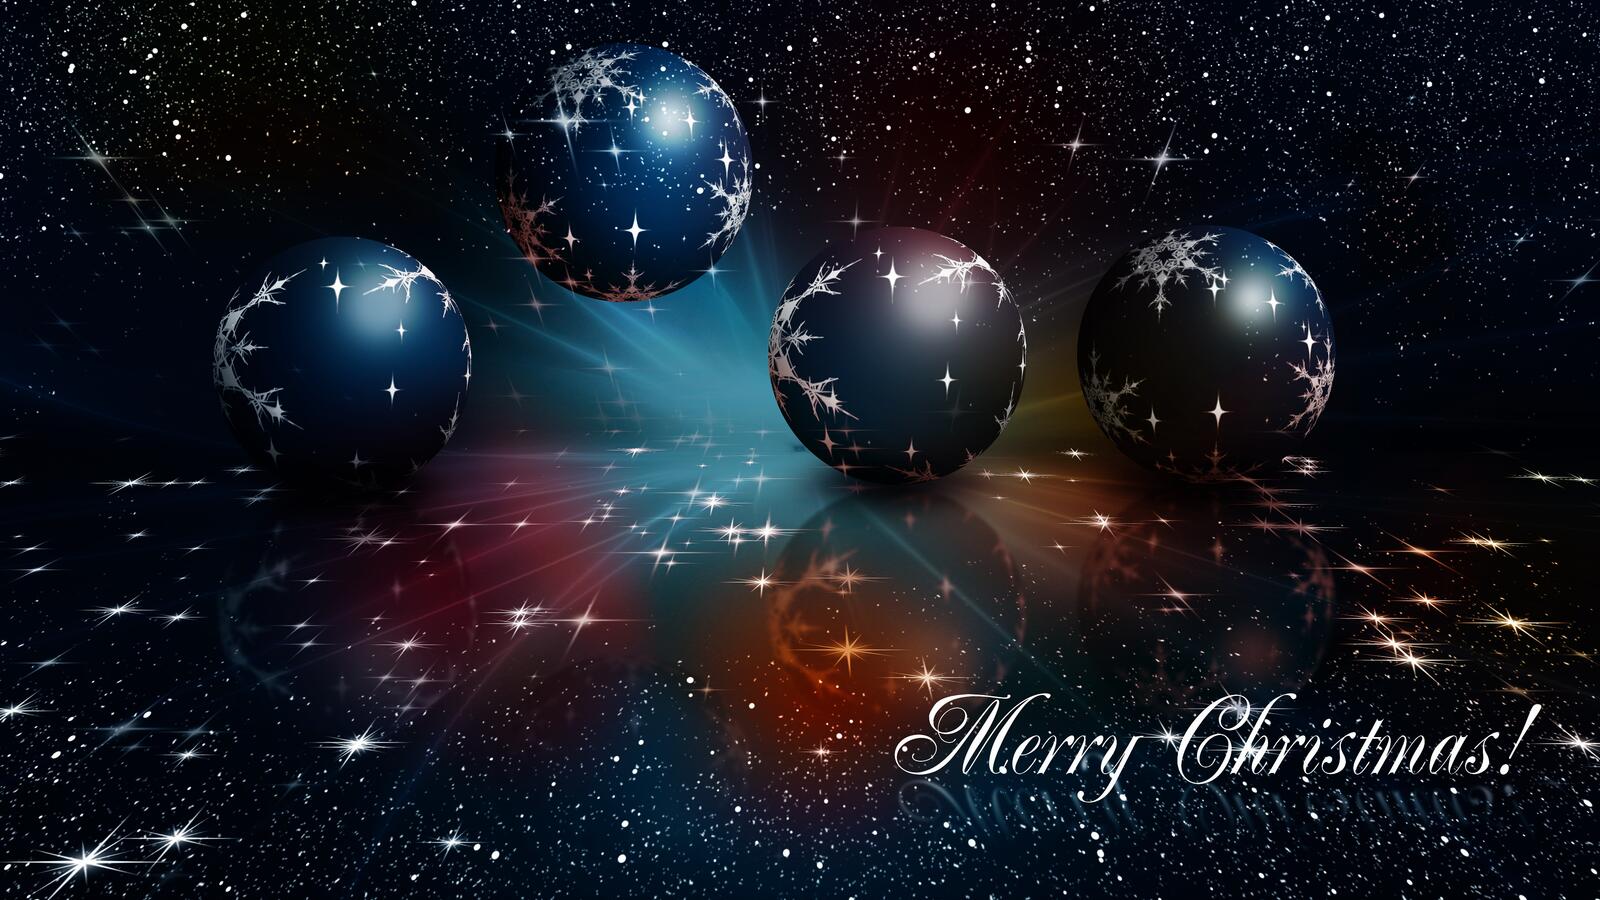 Wallpapers Christmas Christmas ornament background on the desktop